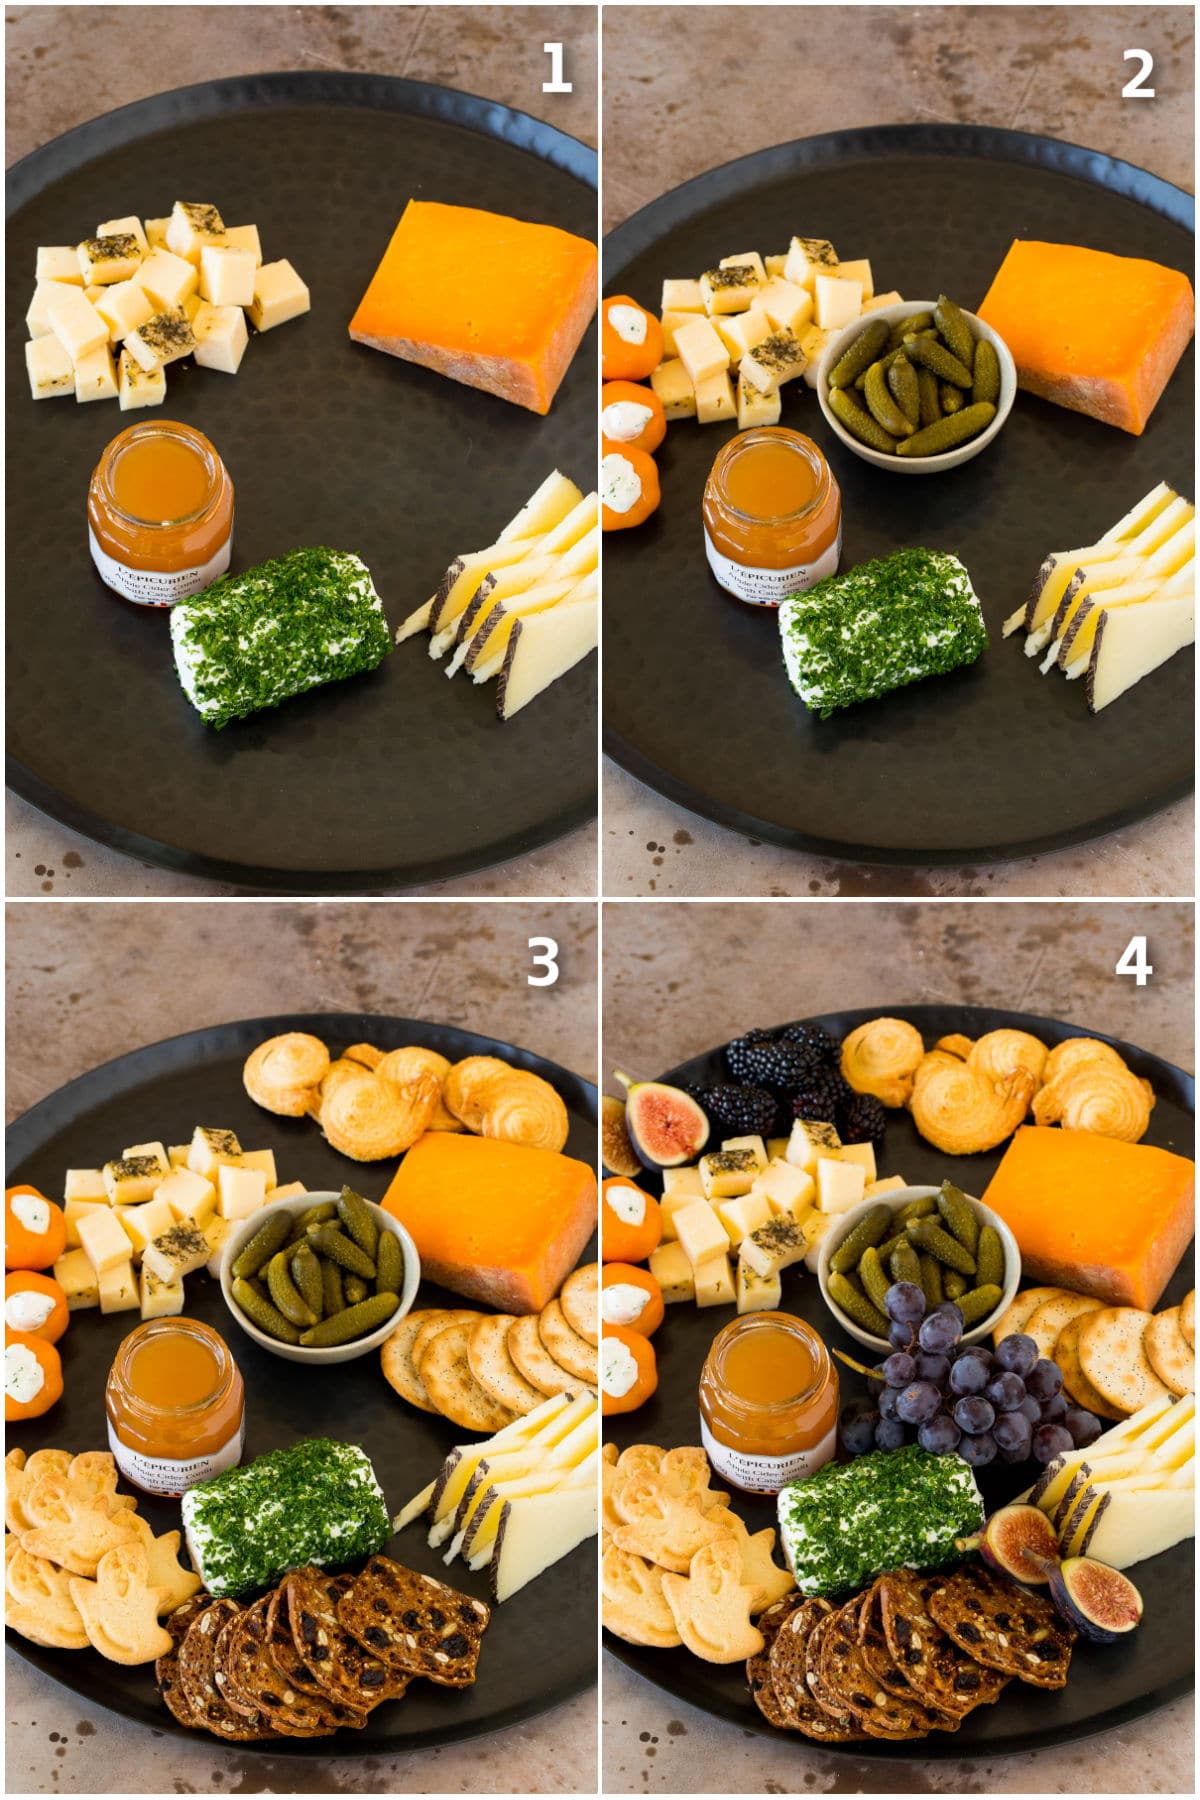 Step by step shots showing how to assemble a cheese platter.